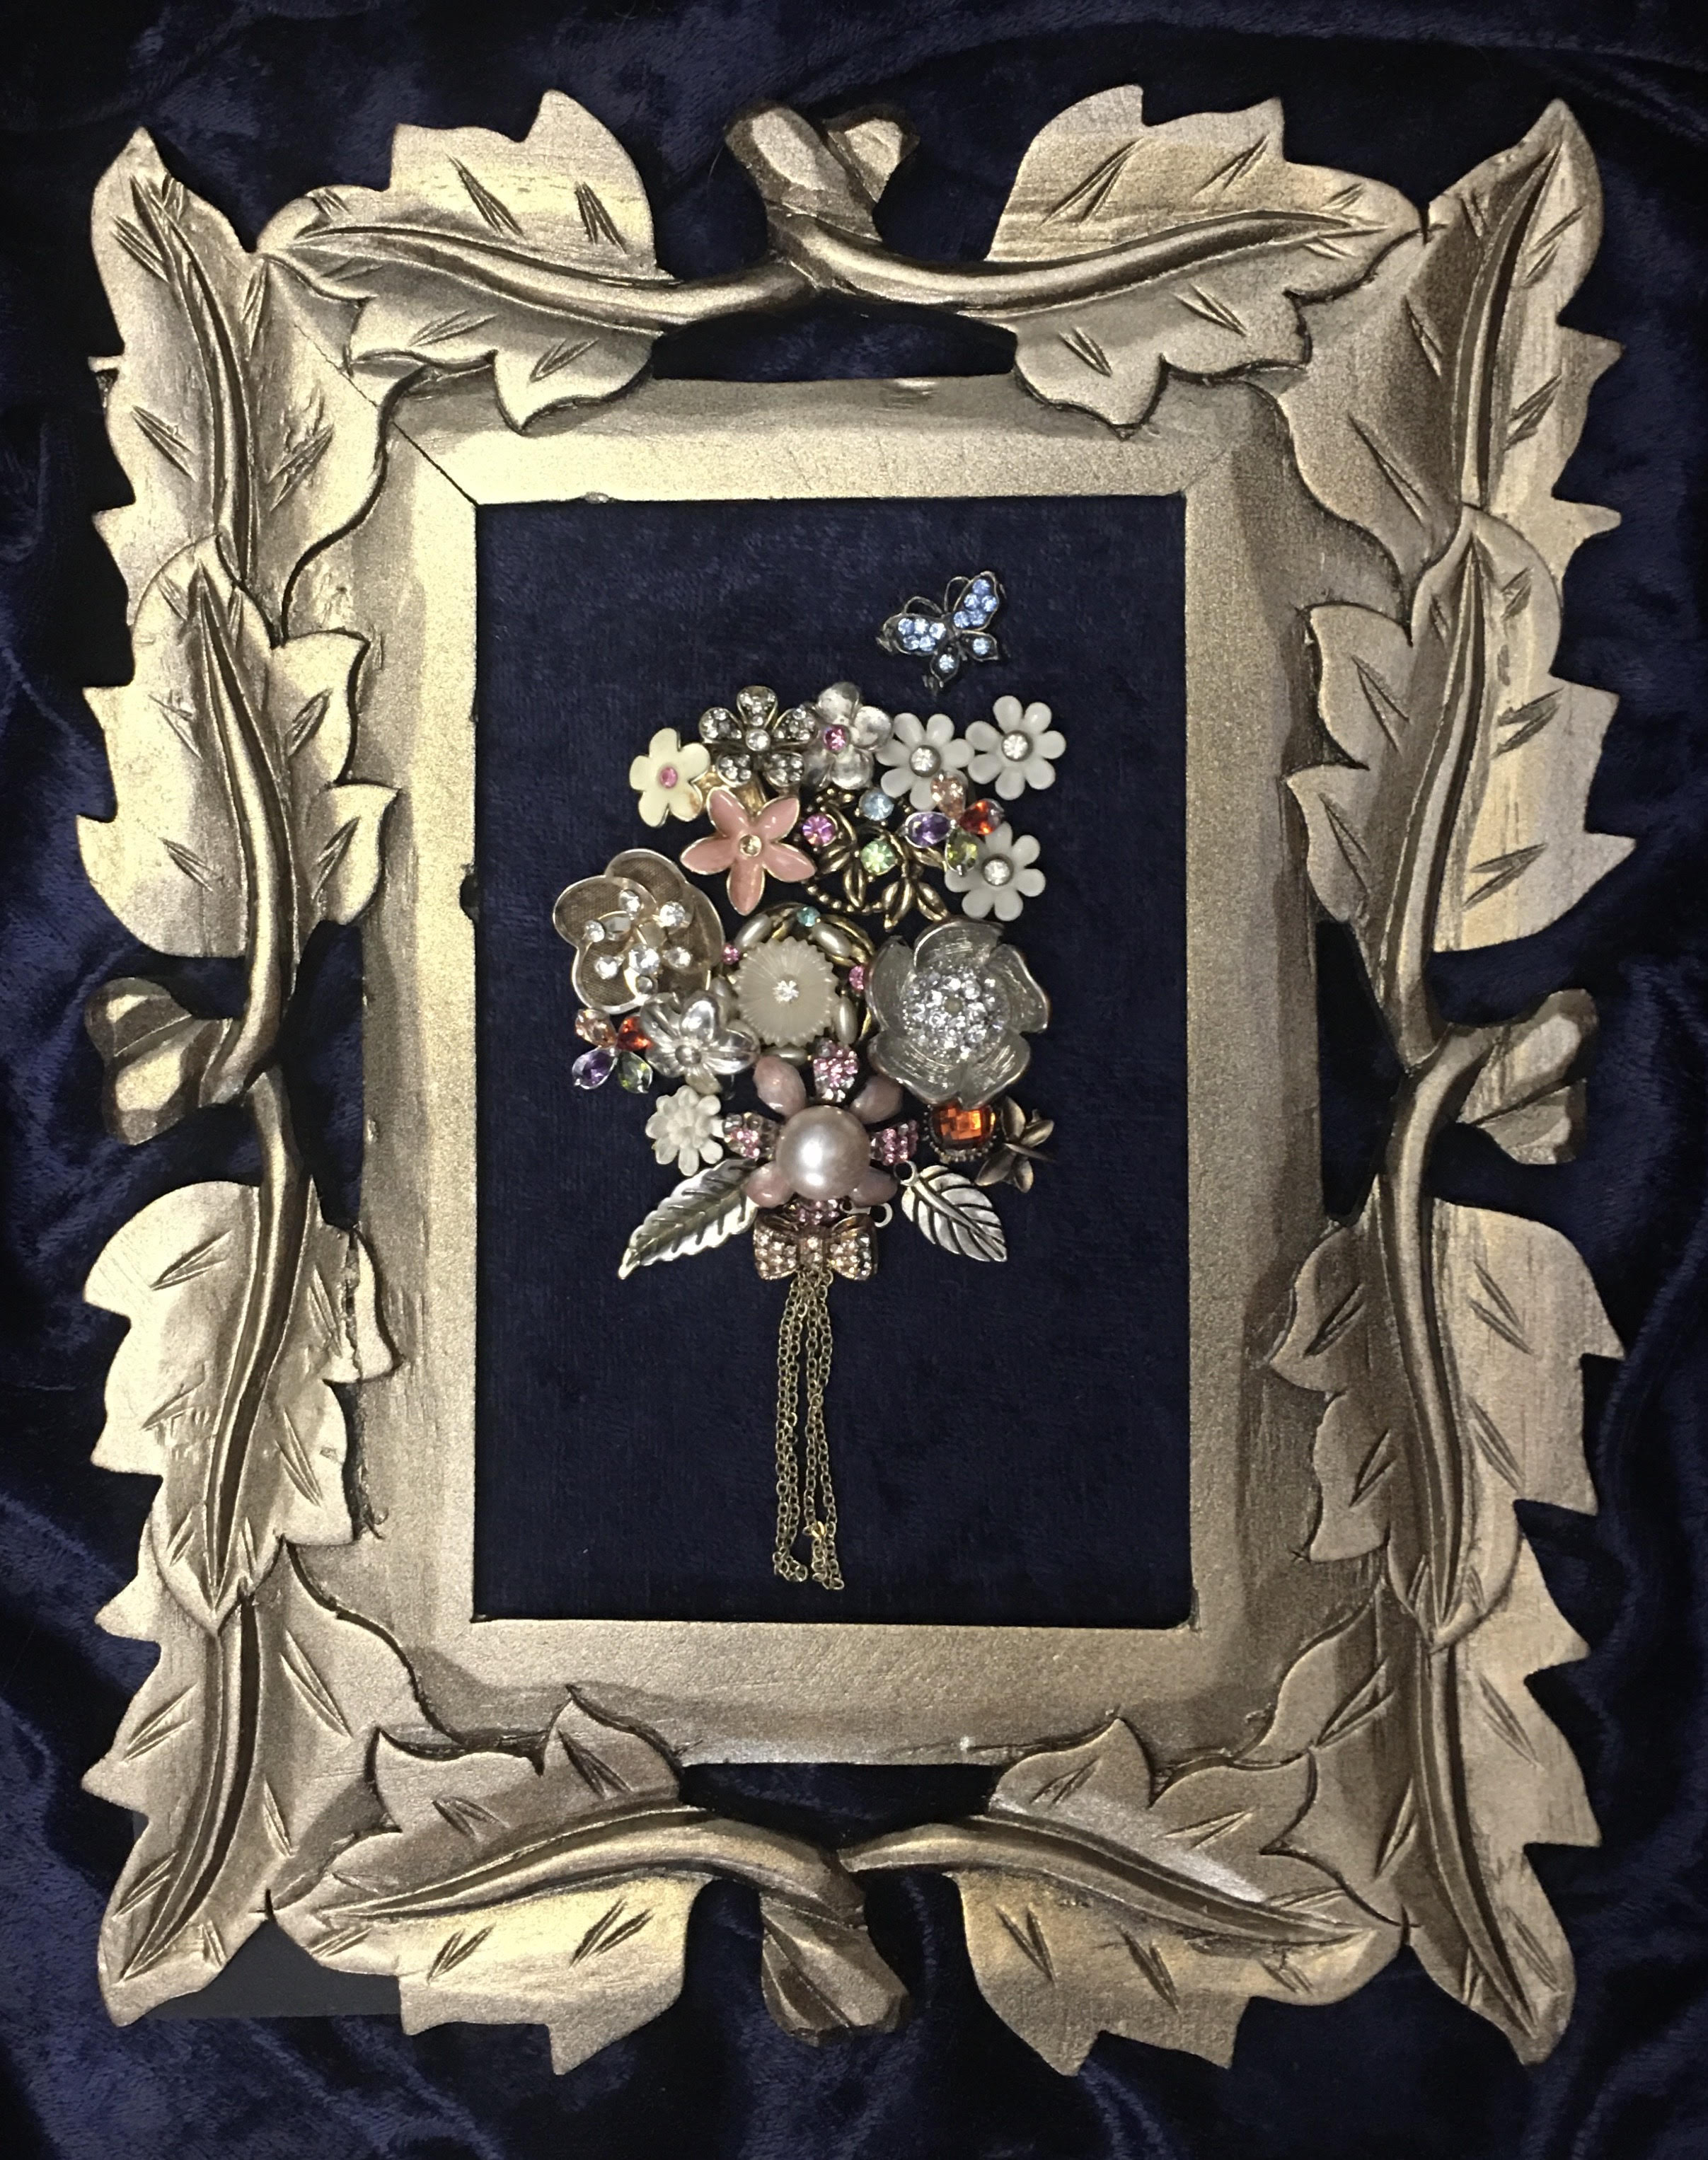 Frame with jewelry laid out on it.